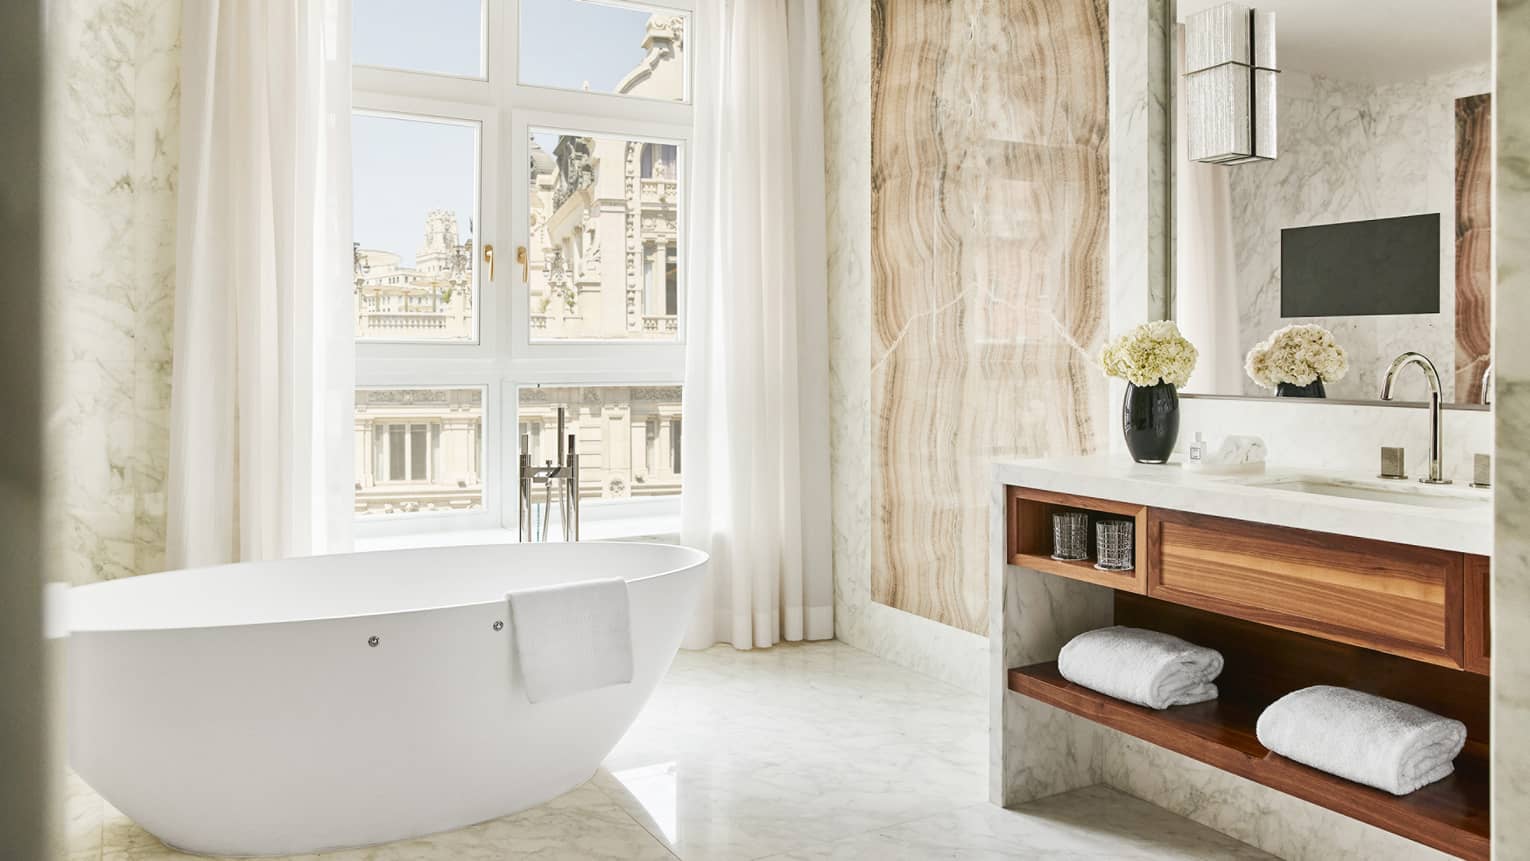 Bathroom with wall of windows, free-standing white tub, vanity with wooden shelves